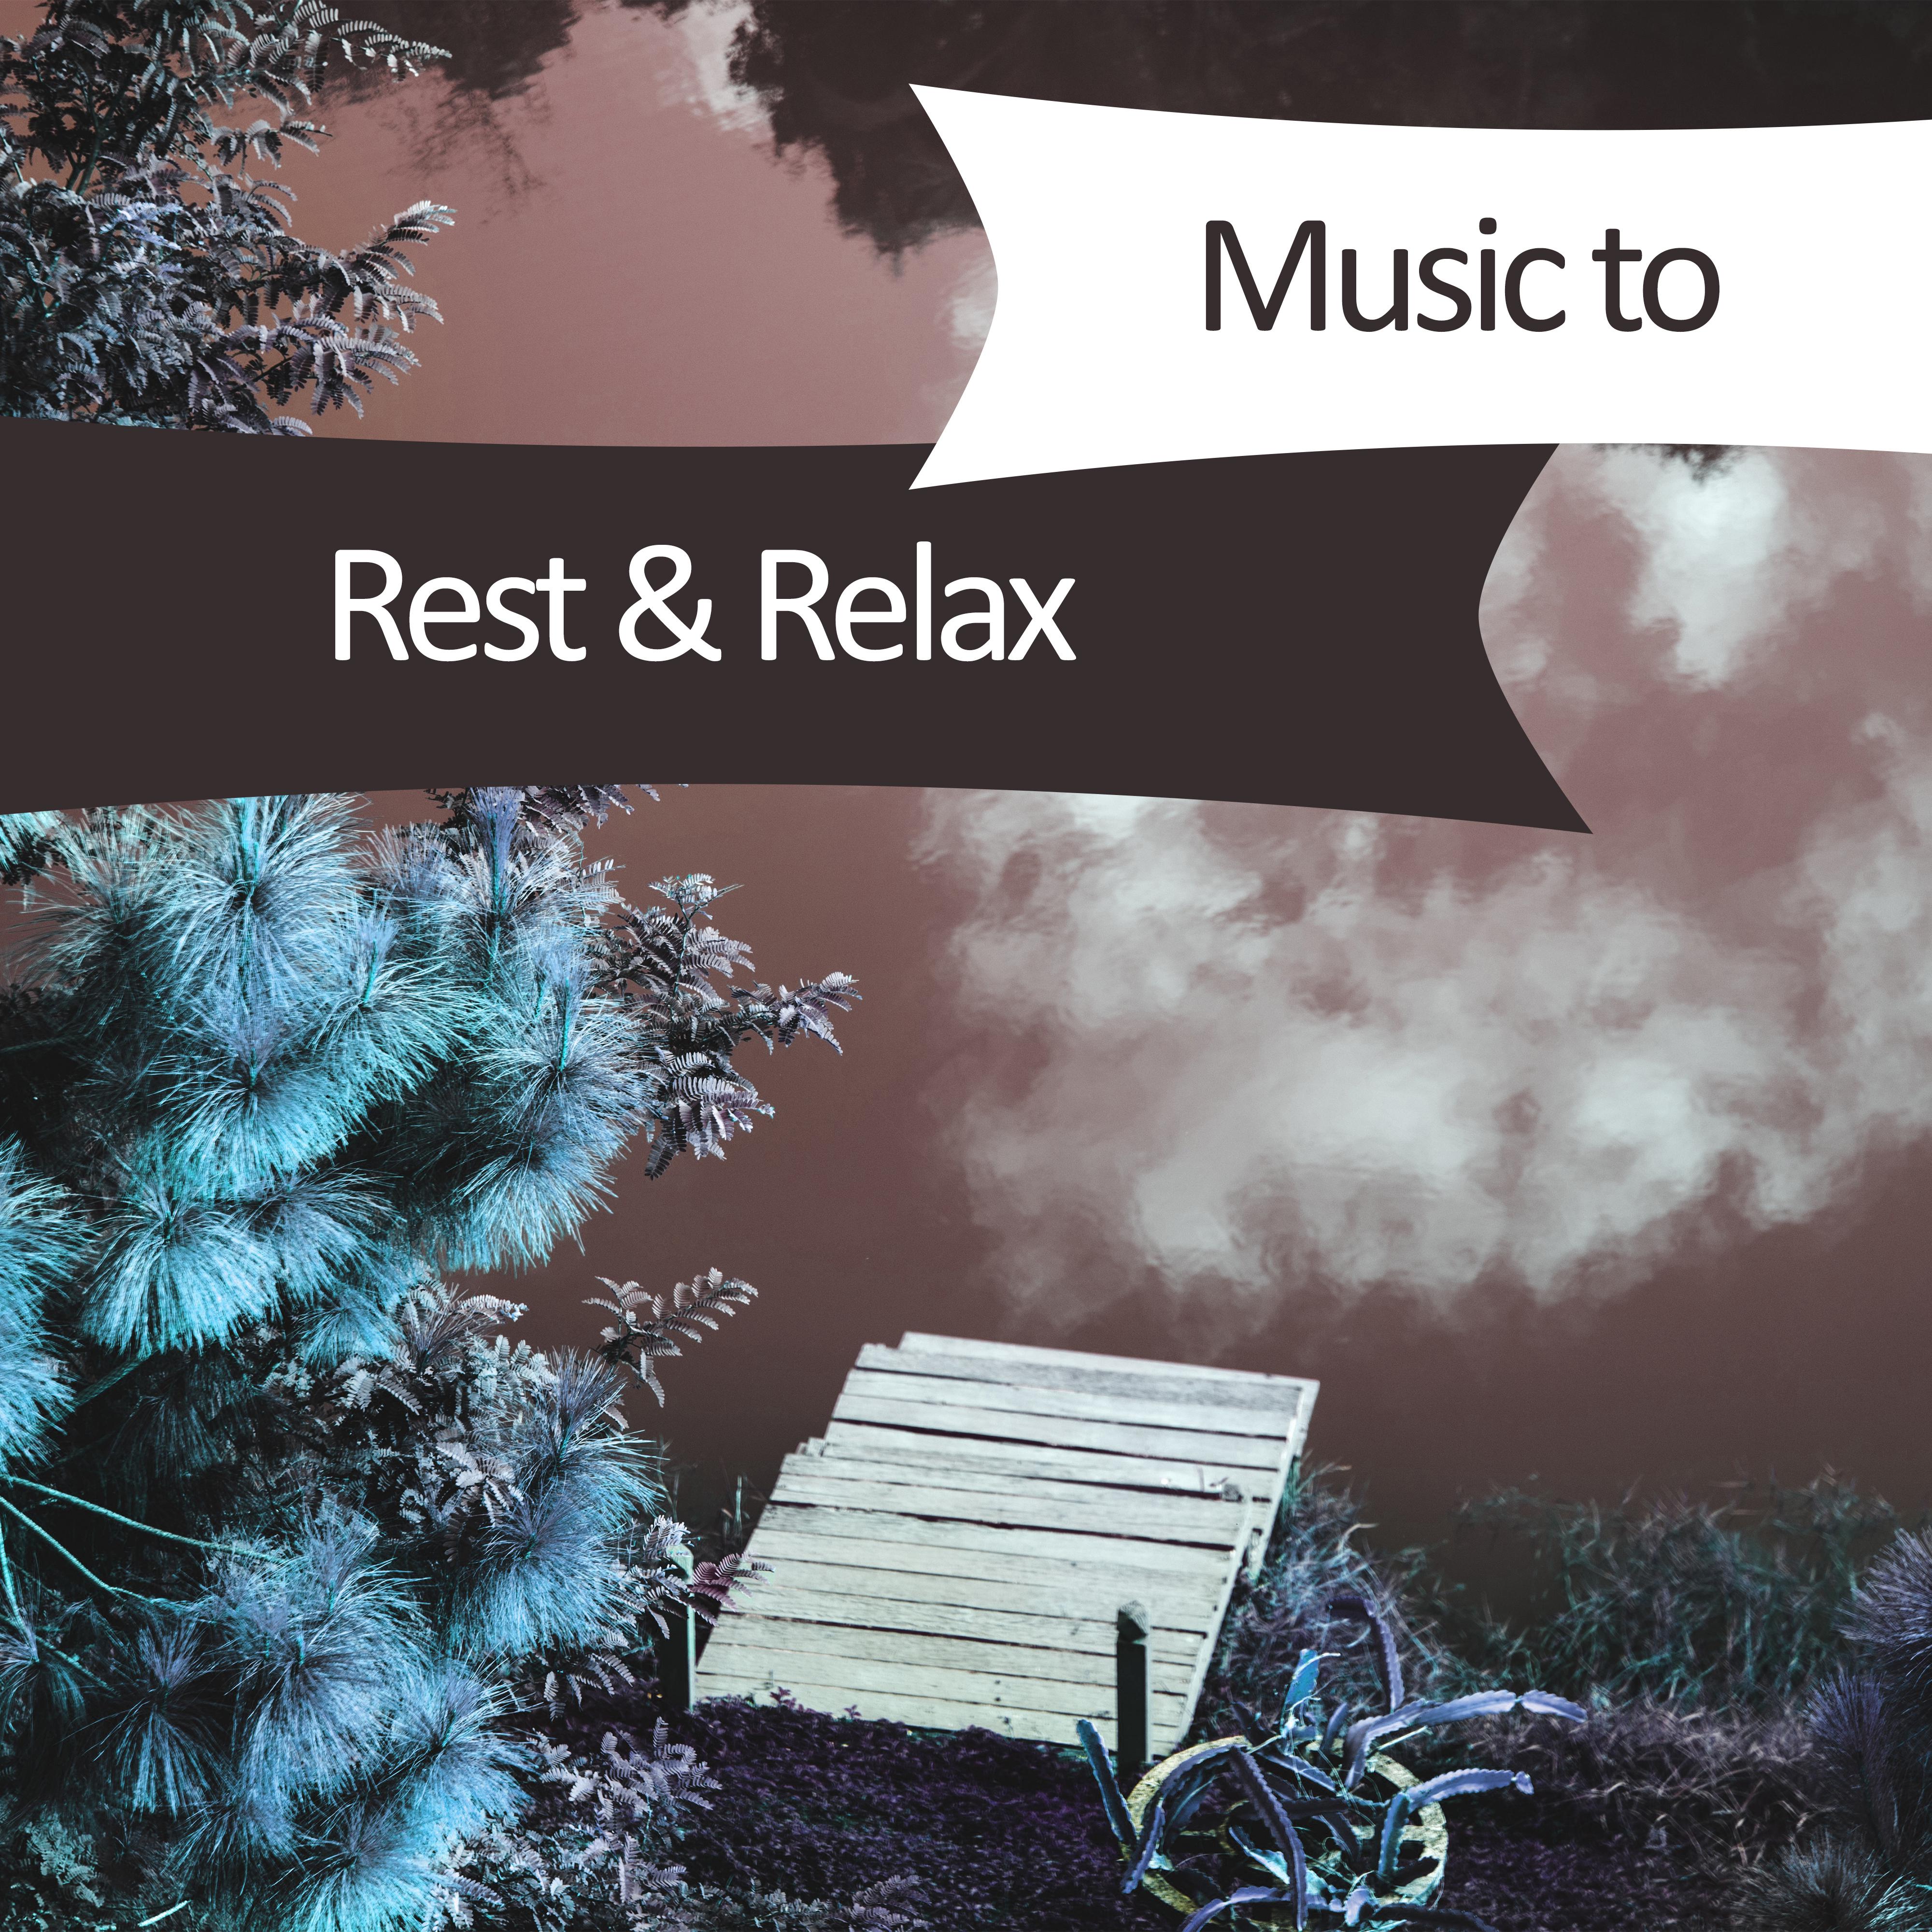 Music to Rest  Relax  Soothing Music, Soft Sounds, New Age Calmness, Healing Therapy